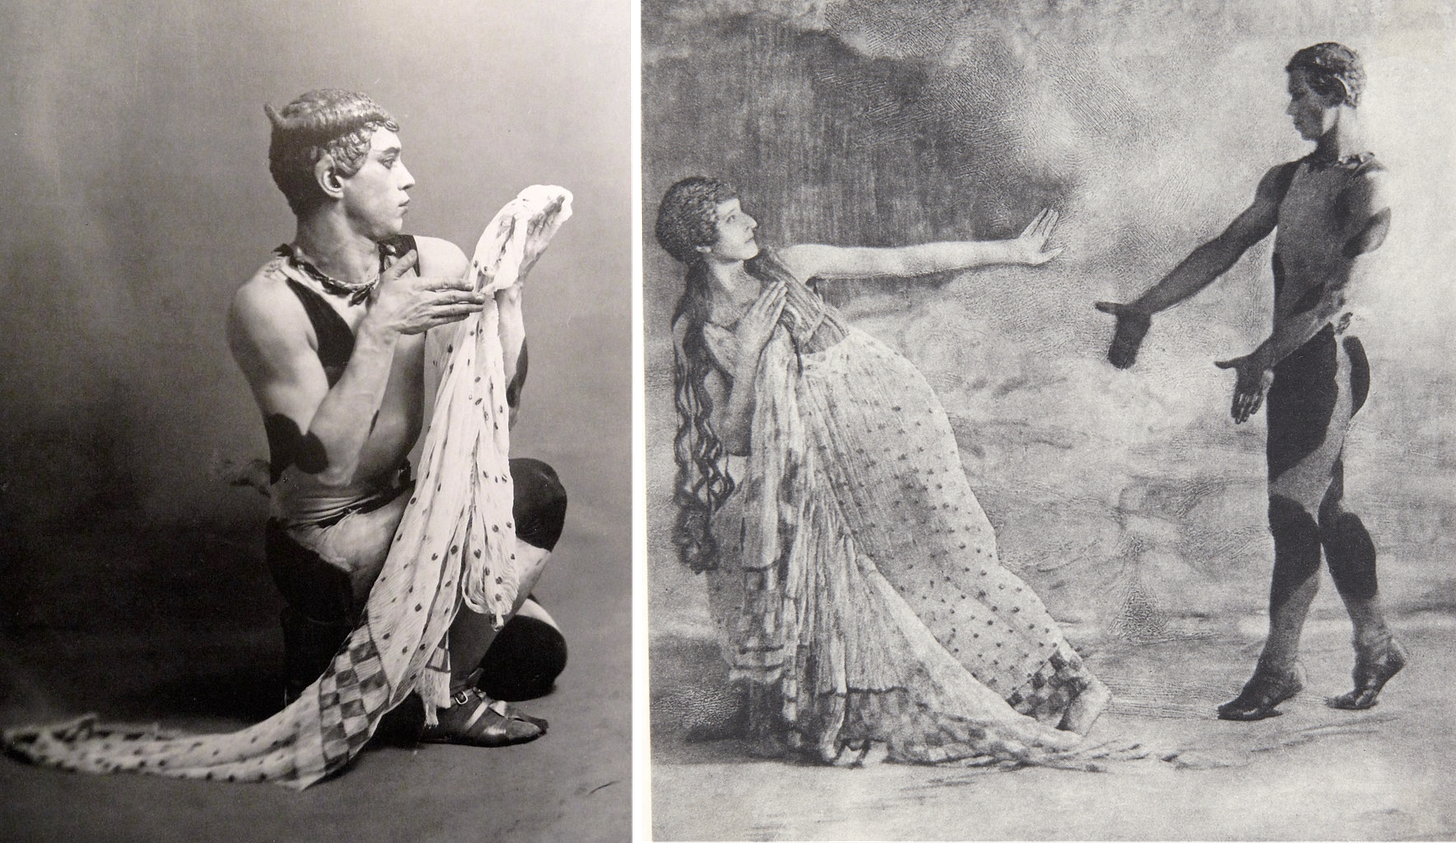 Two black-and-white photographs from a 1912 ballet production, featuring a ballerino dressed as a faun and a ballerina dressed as an ancient Greek nymph